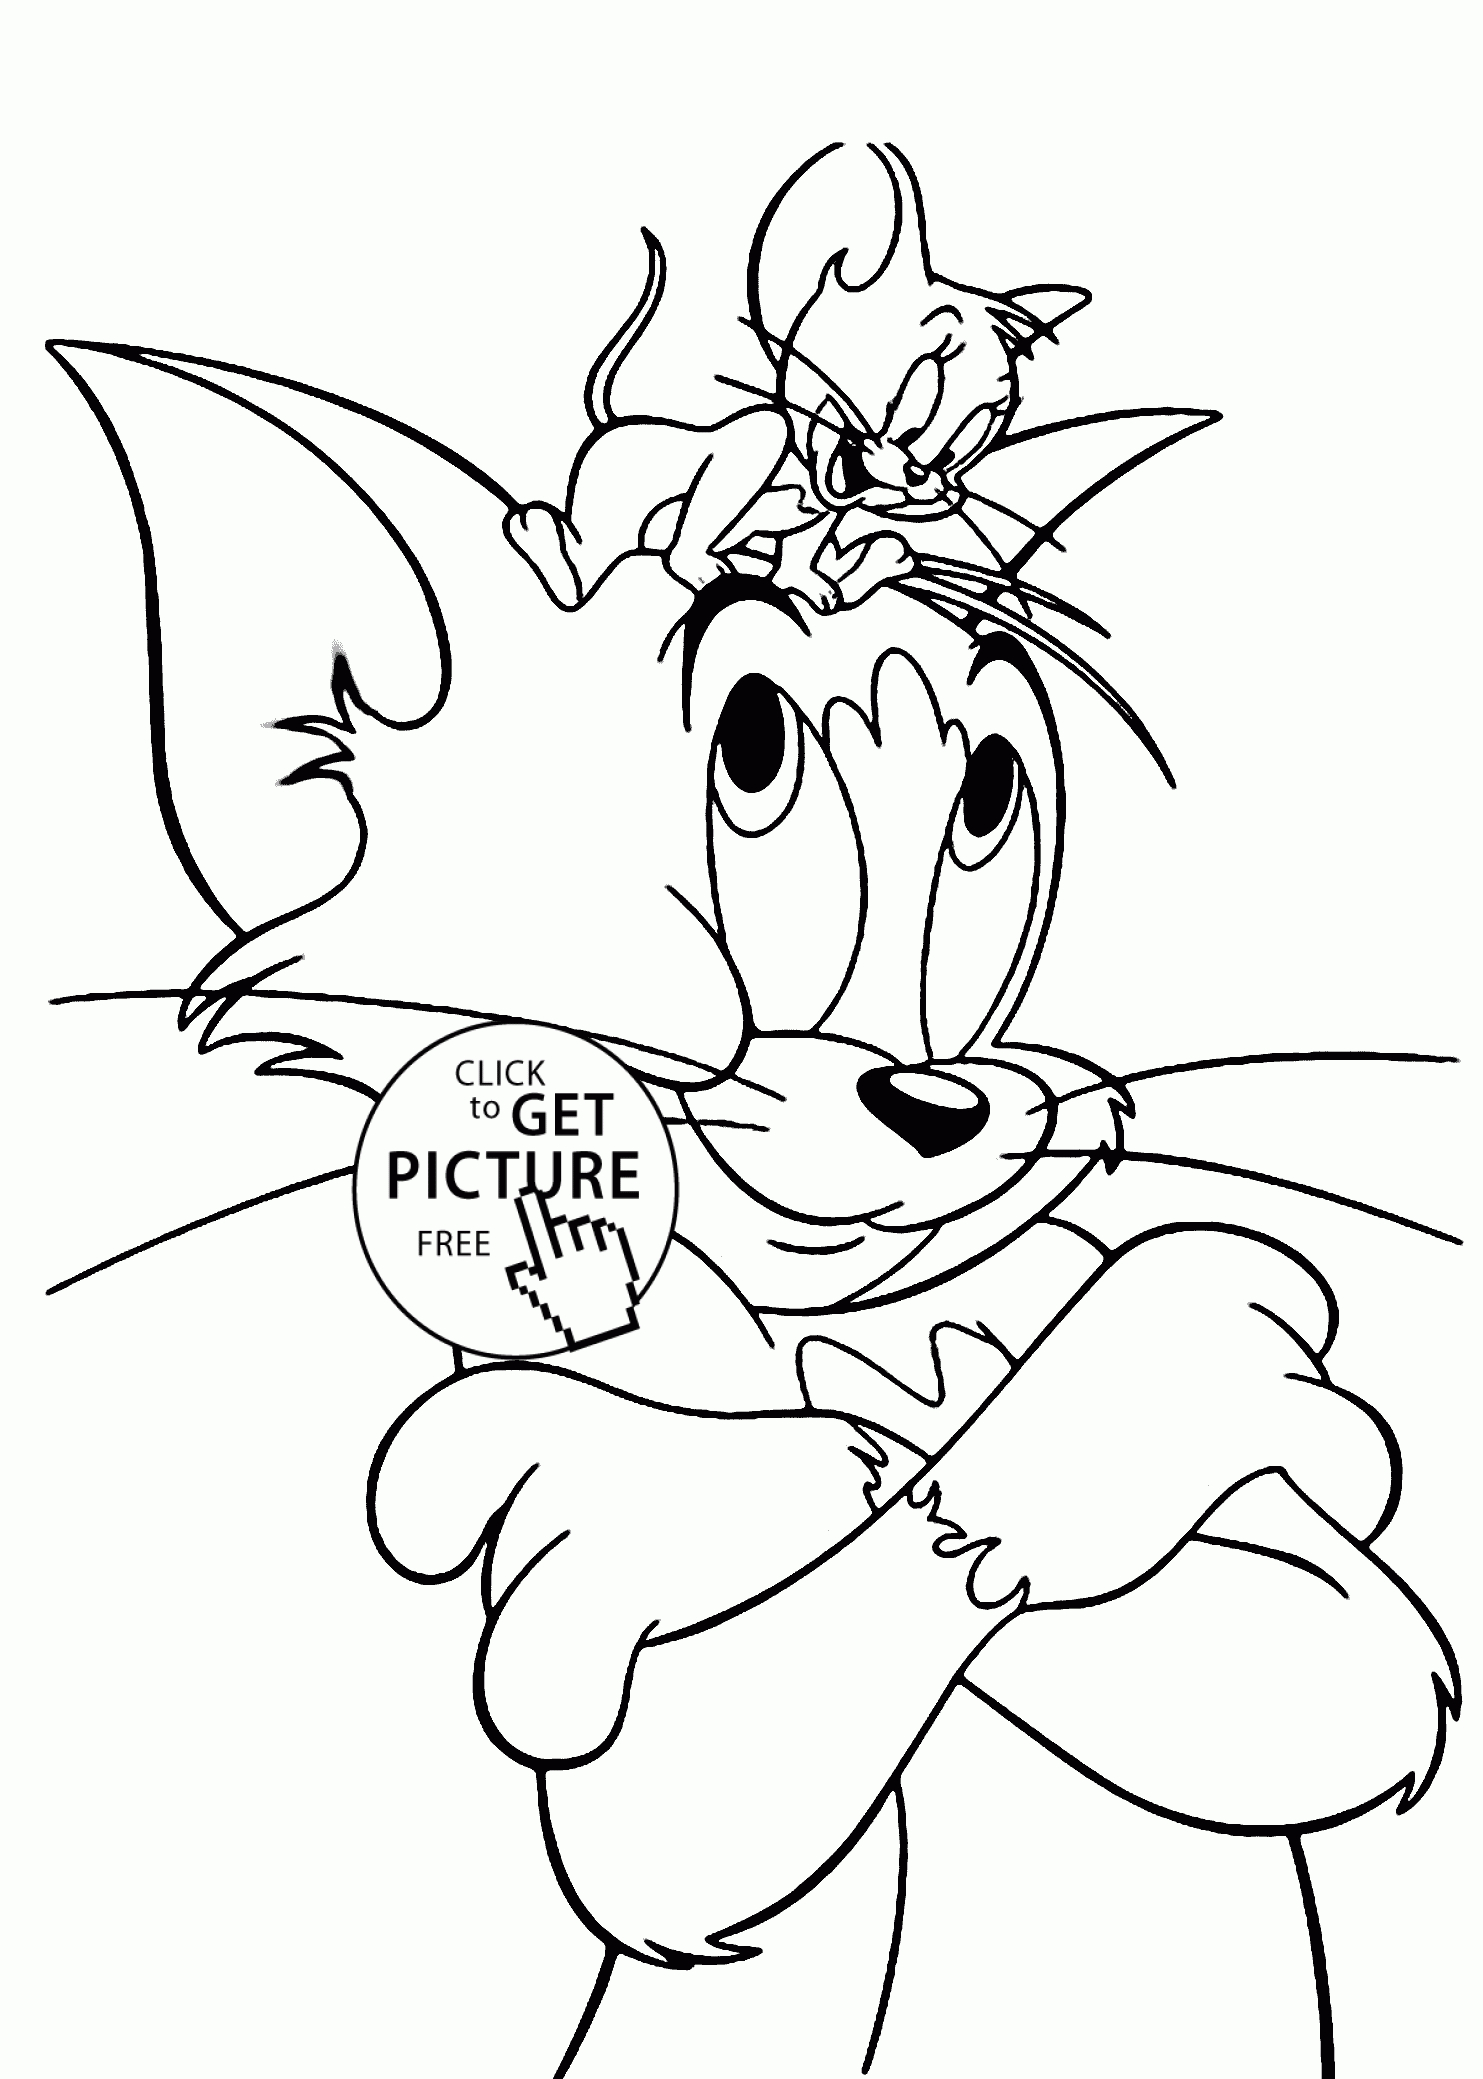 Tom And Jerry Coloring Pages For Kids, Printable Free - Free Printable Tom And Jerry Coloring Pages